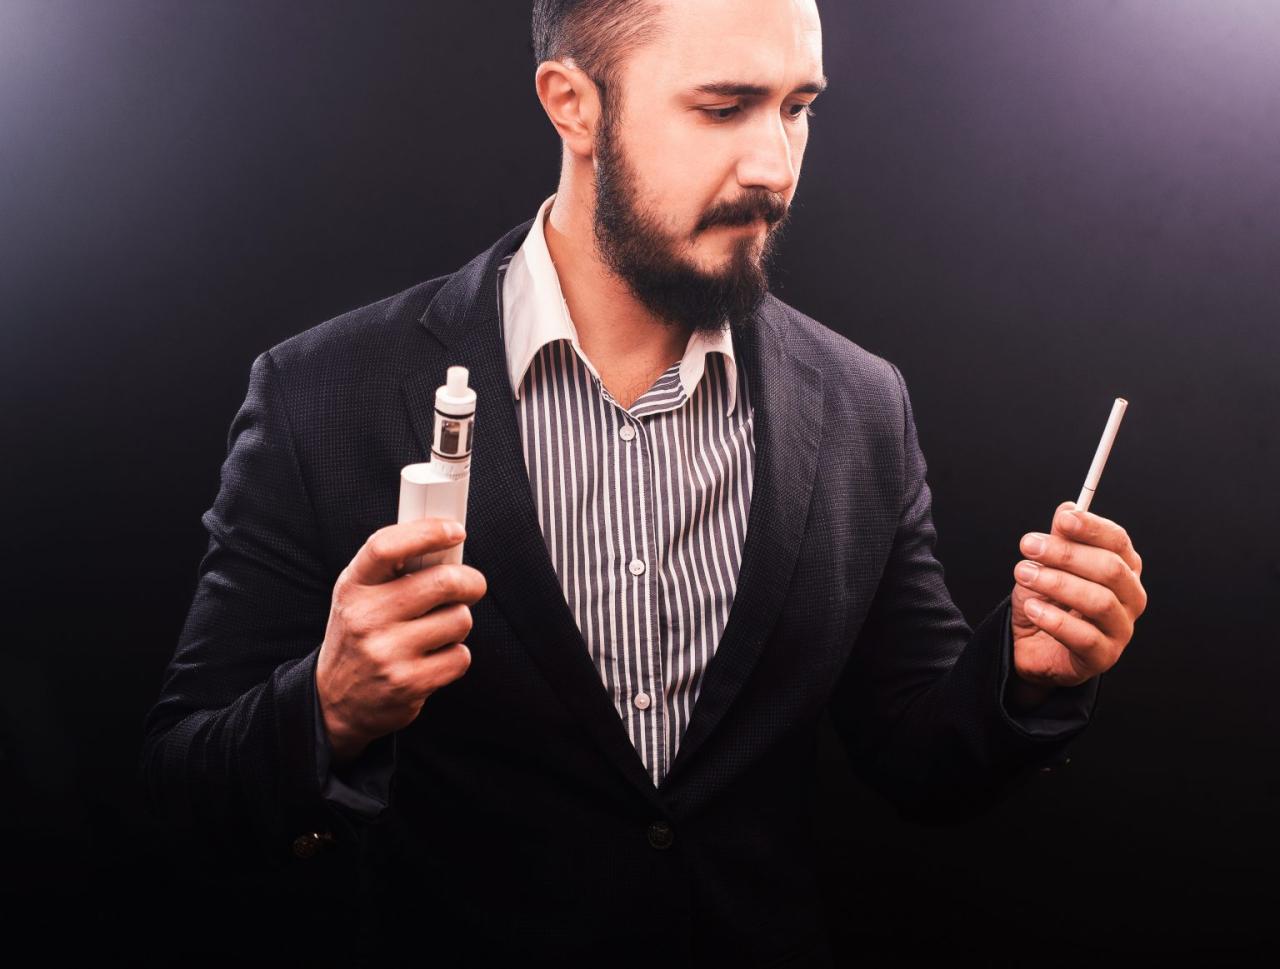 California Study Proves Vaping Helps Smokers Quit